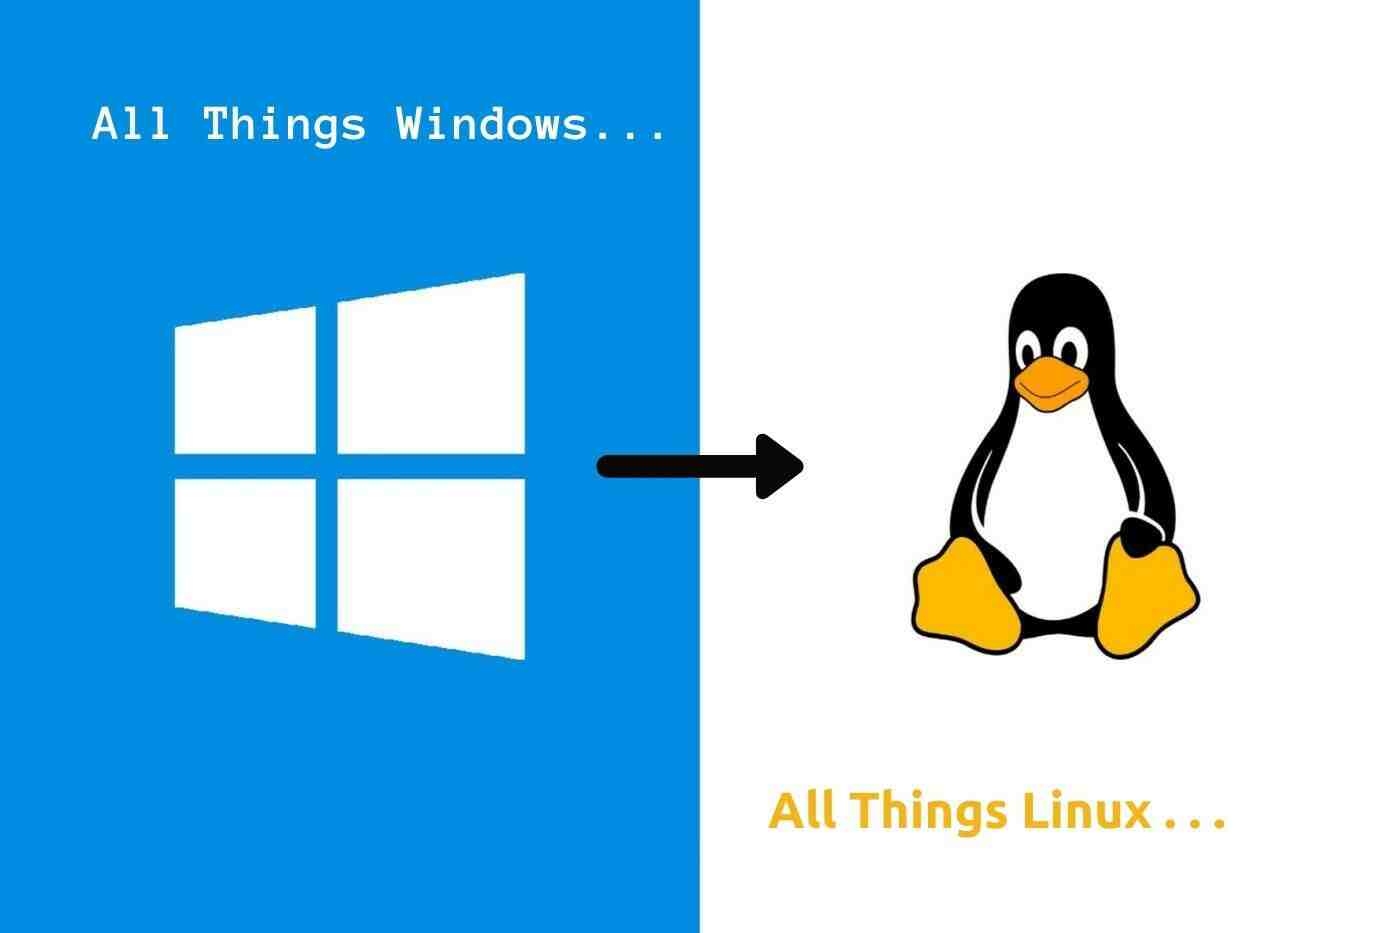 Is switching to Linux hard?